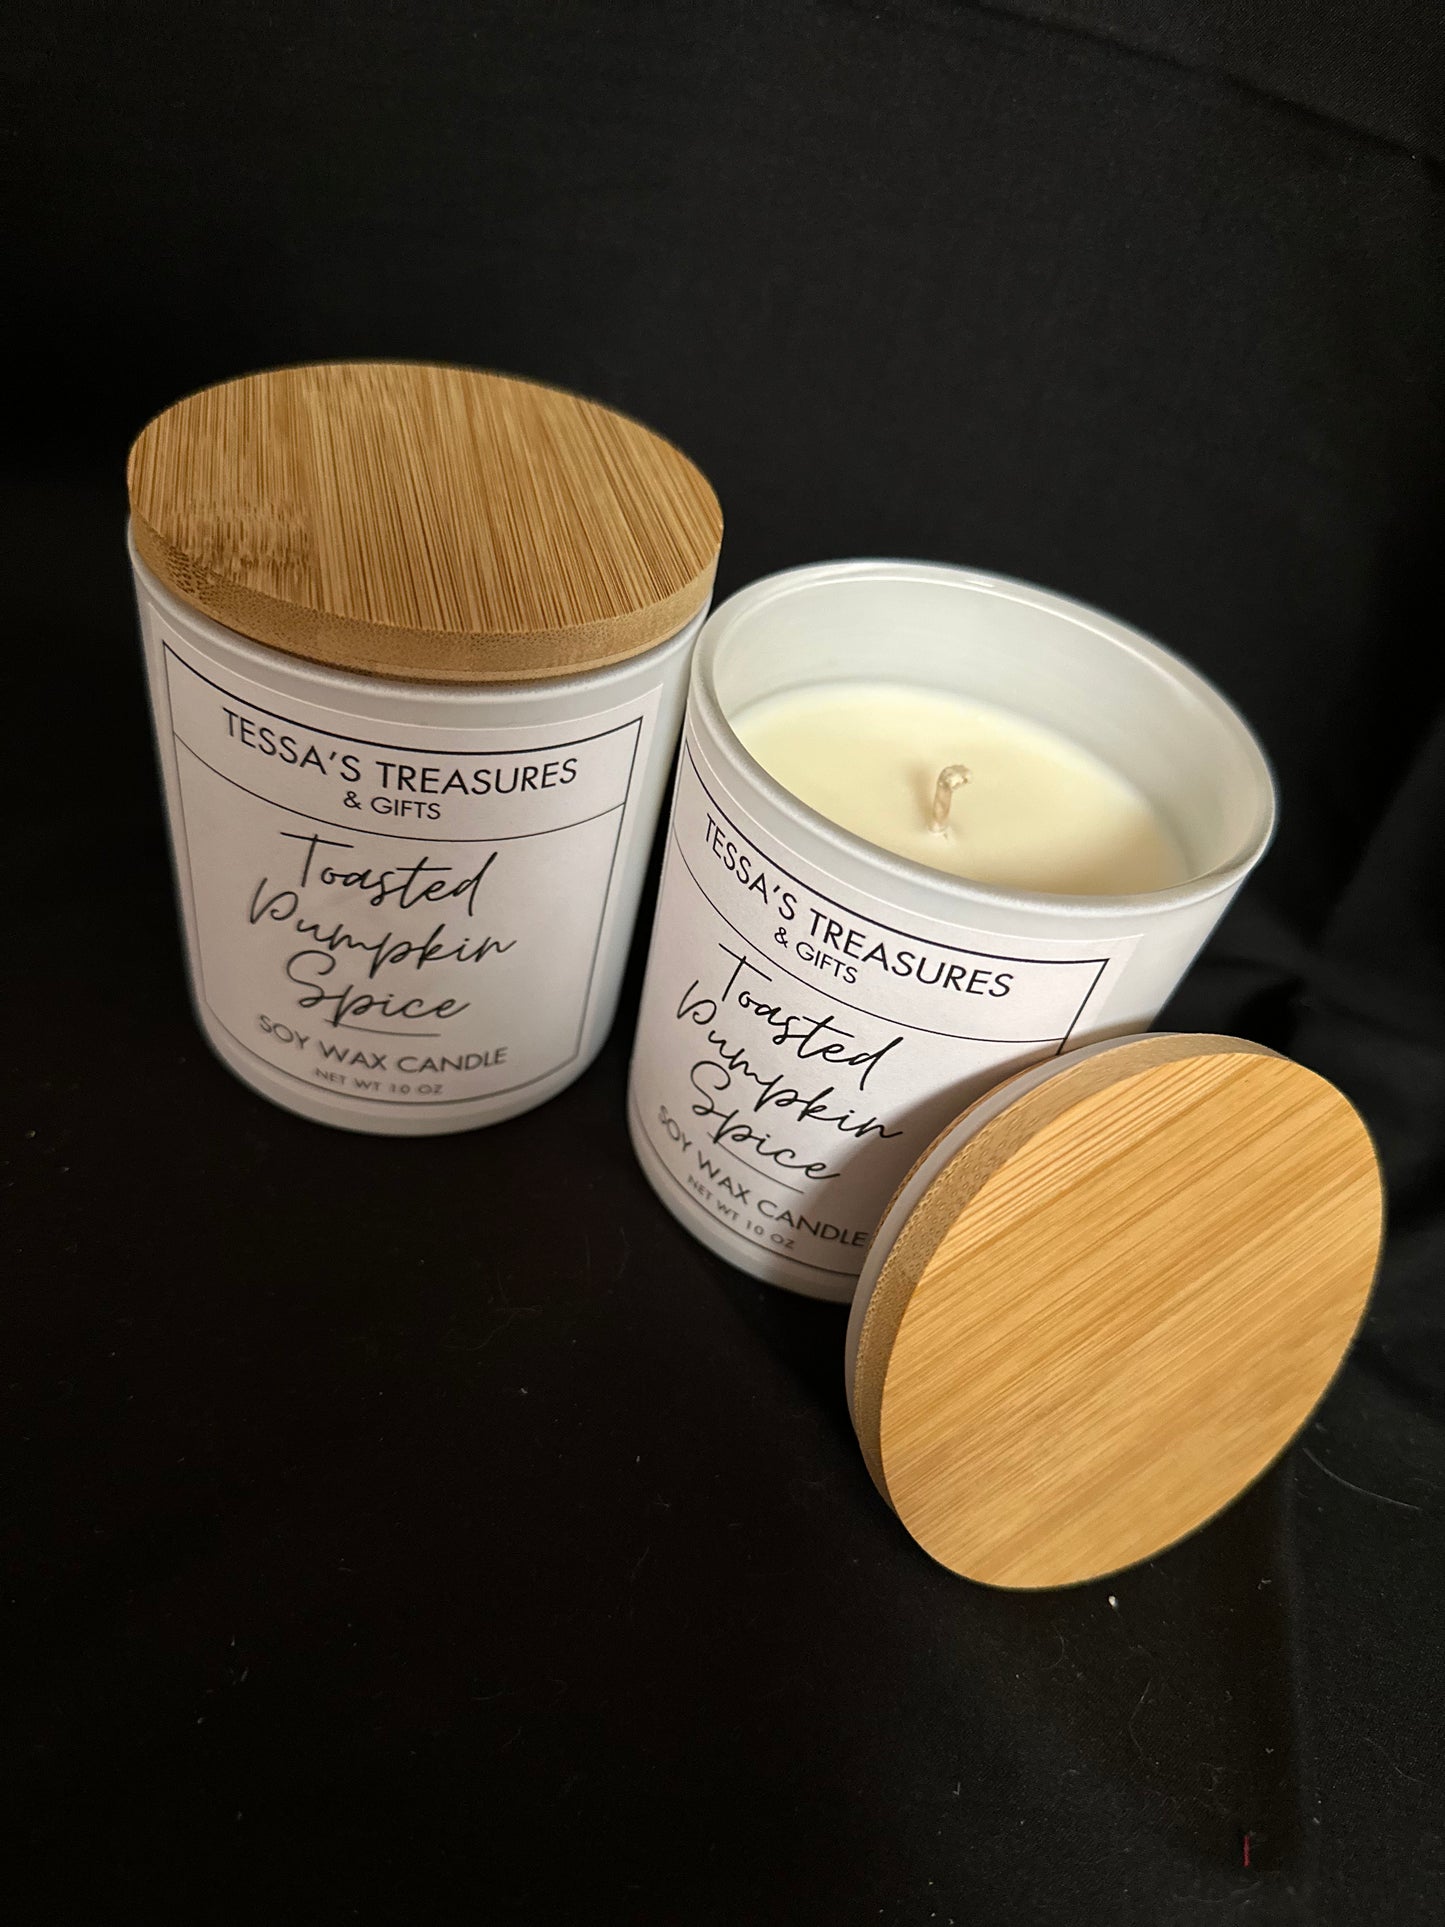 Toasted Pumpkin Spice candle